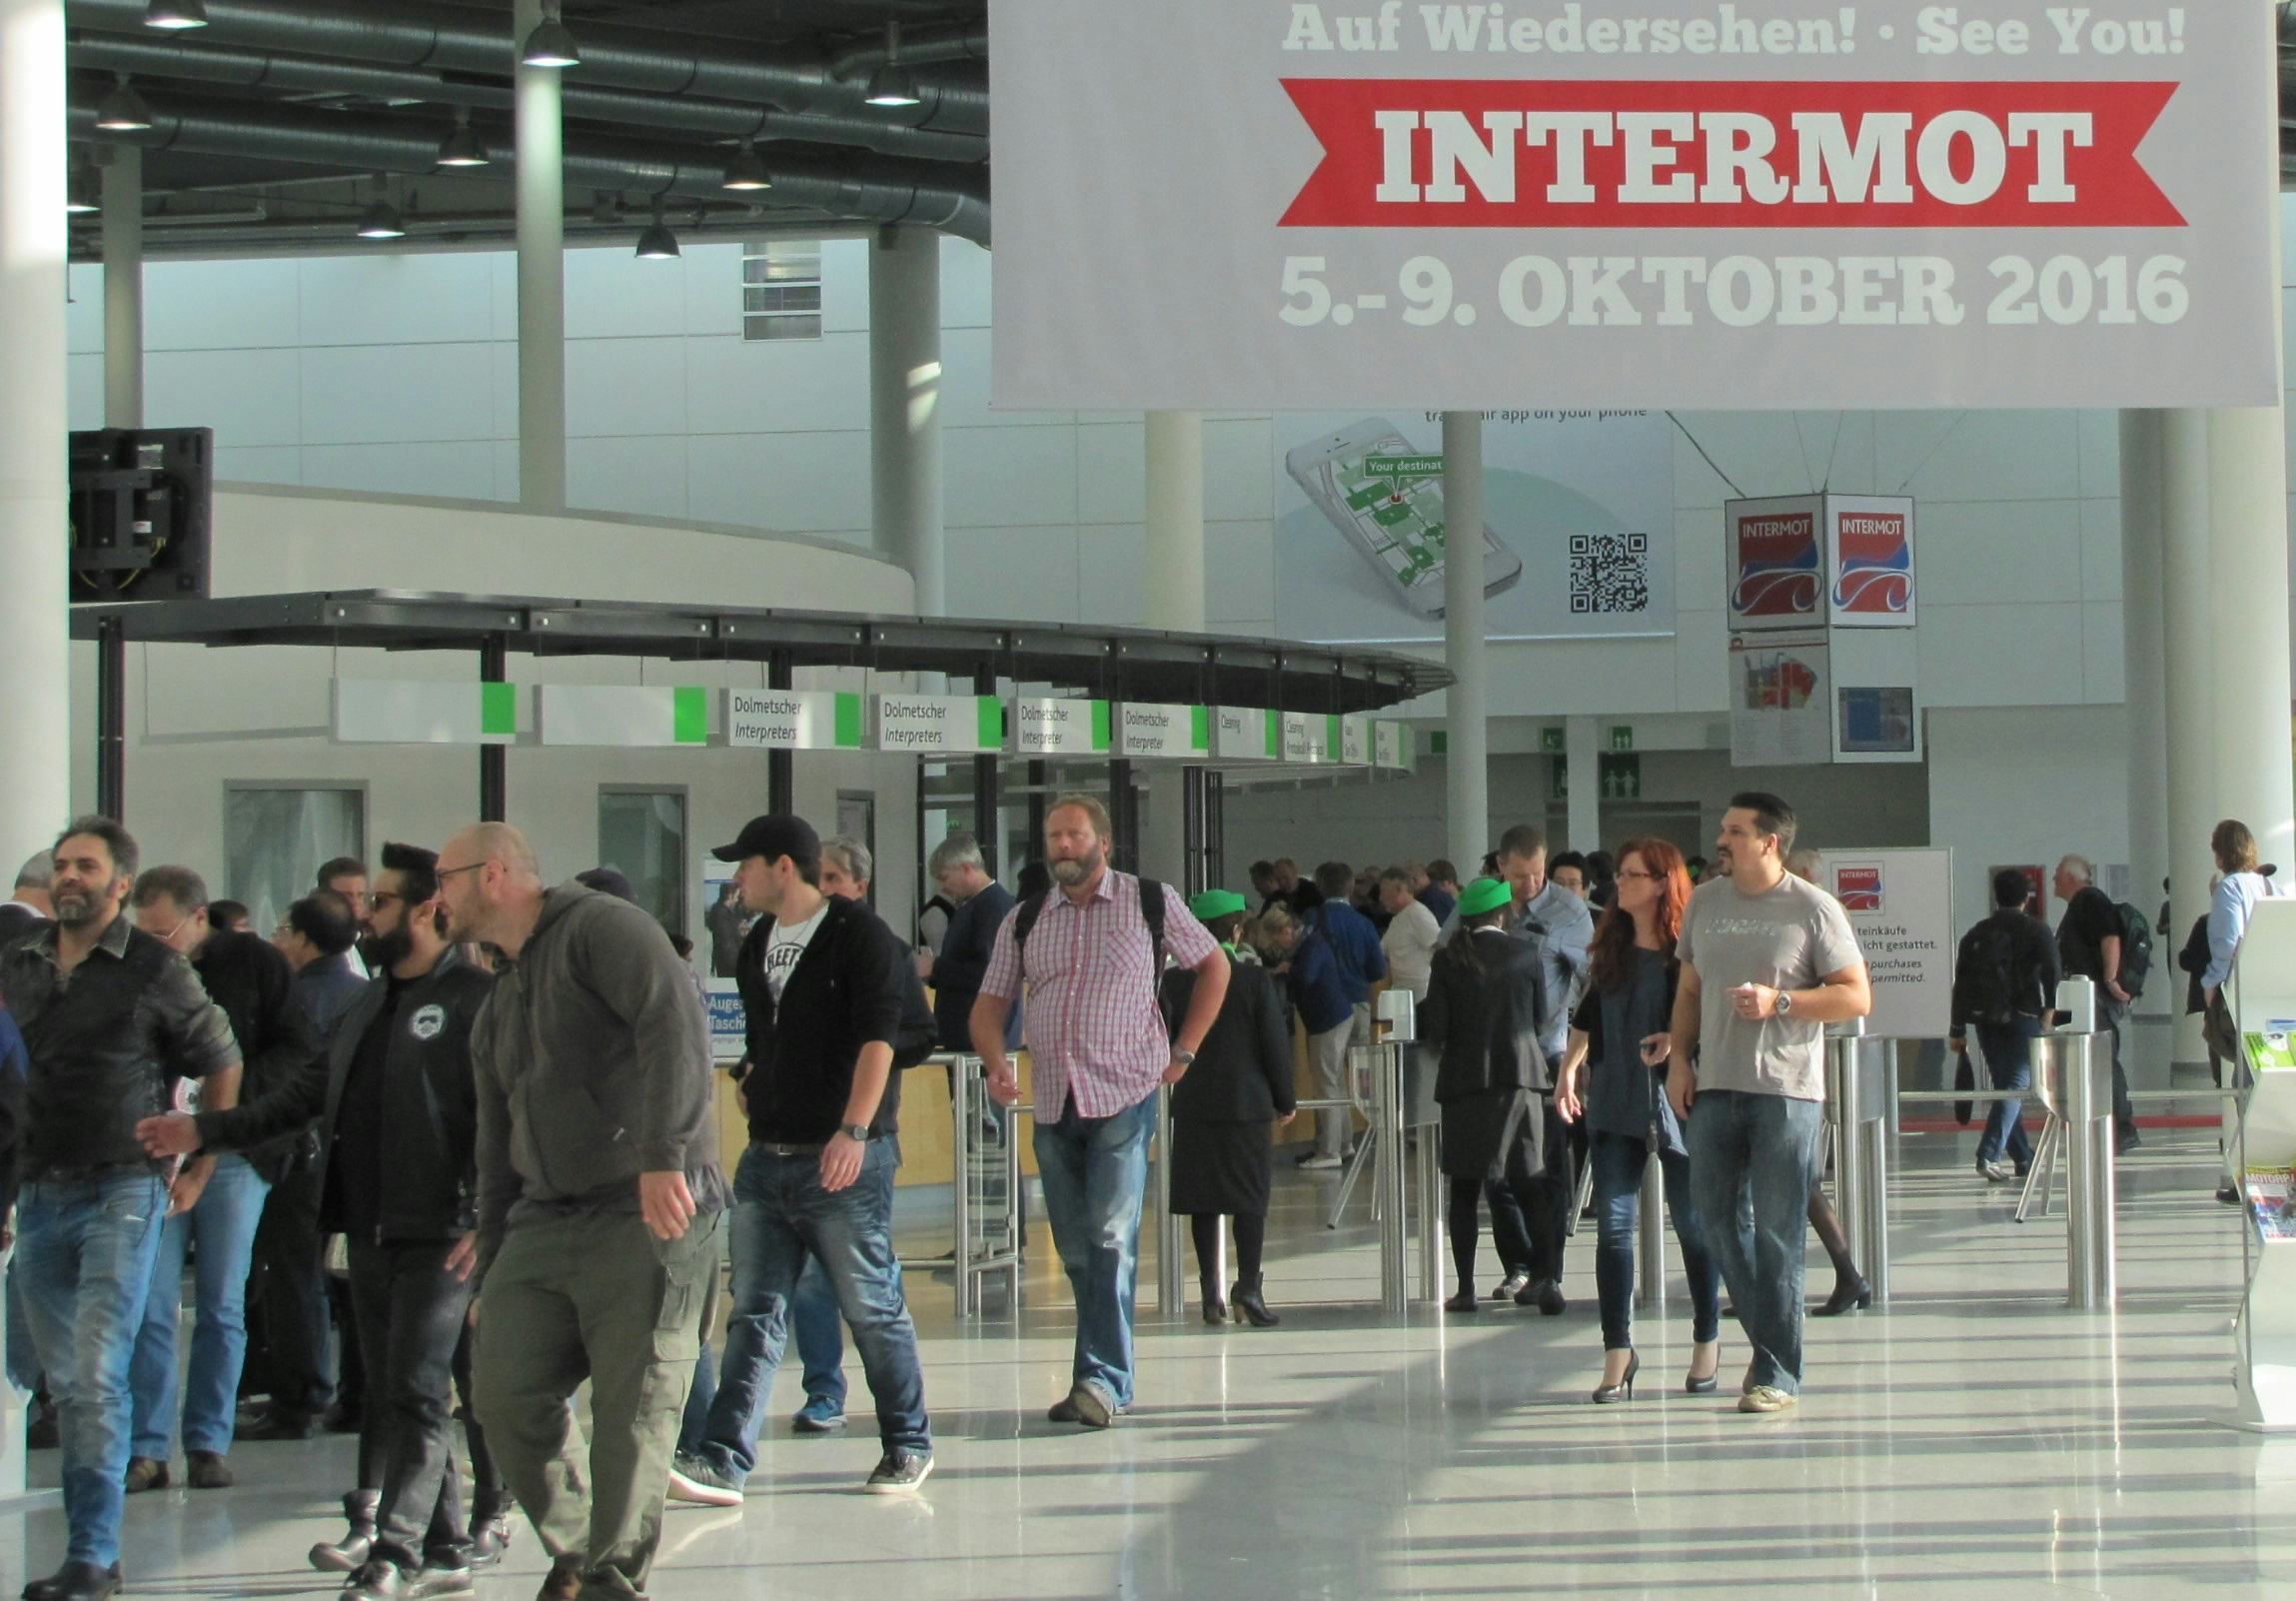 Although motorbikes are still leading, the importance of e-mobility is growing at Intermot. – Photo Bike Europe